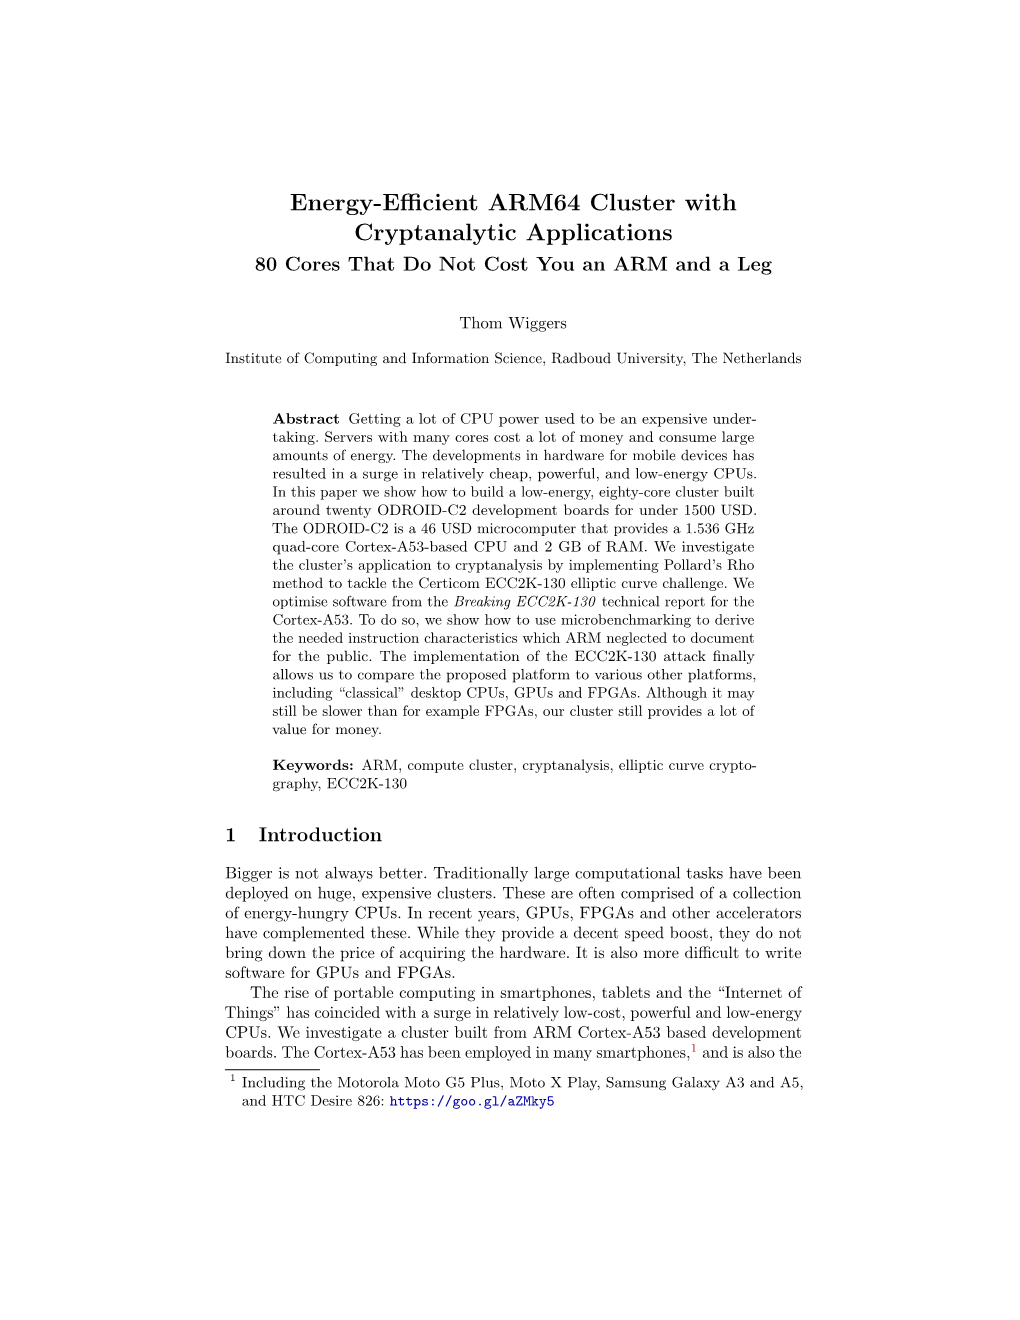 Energy-Efficient ARM64 Cluster with Cryptanalytic Applications